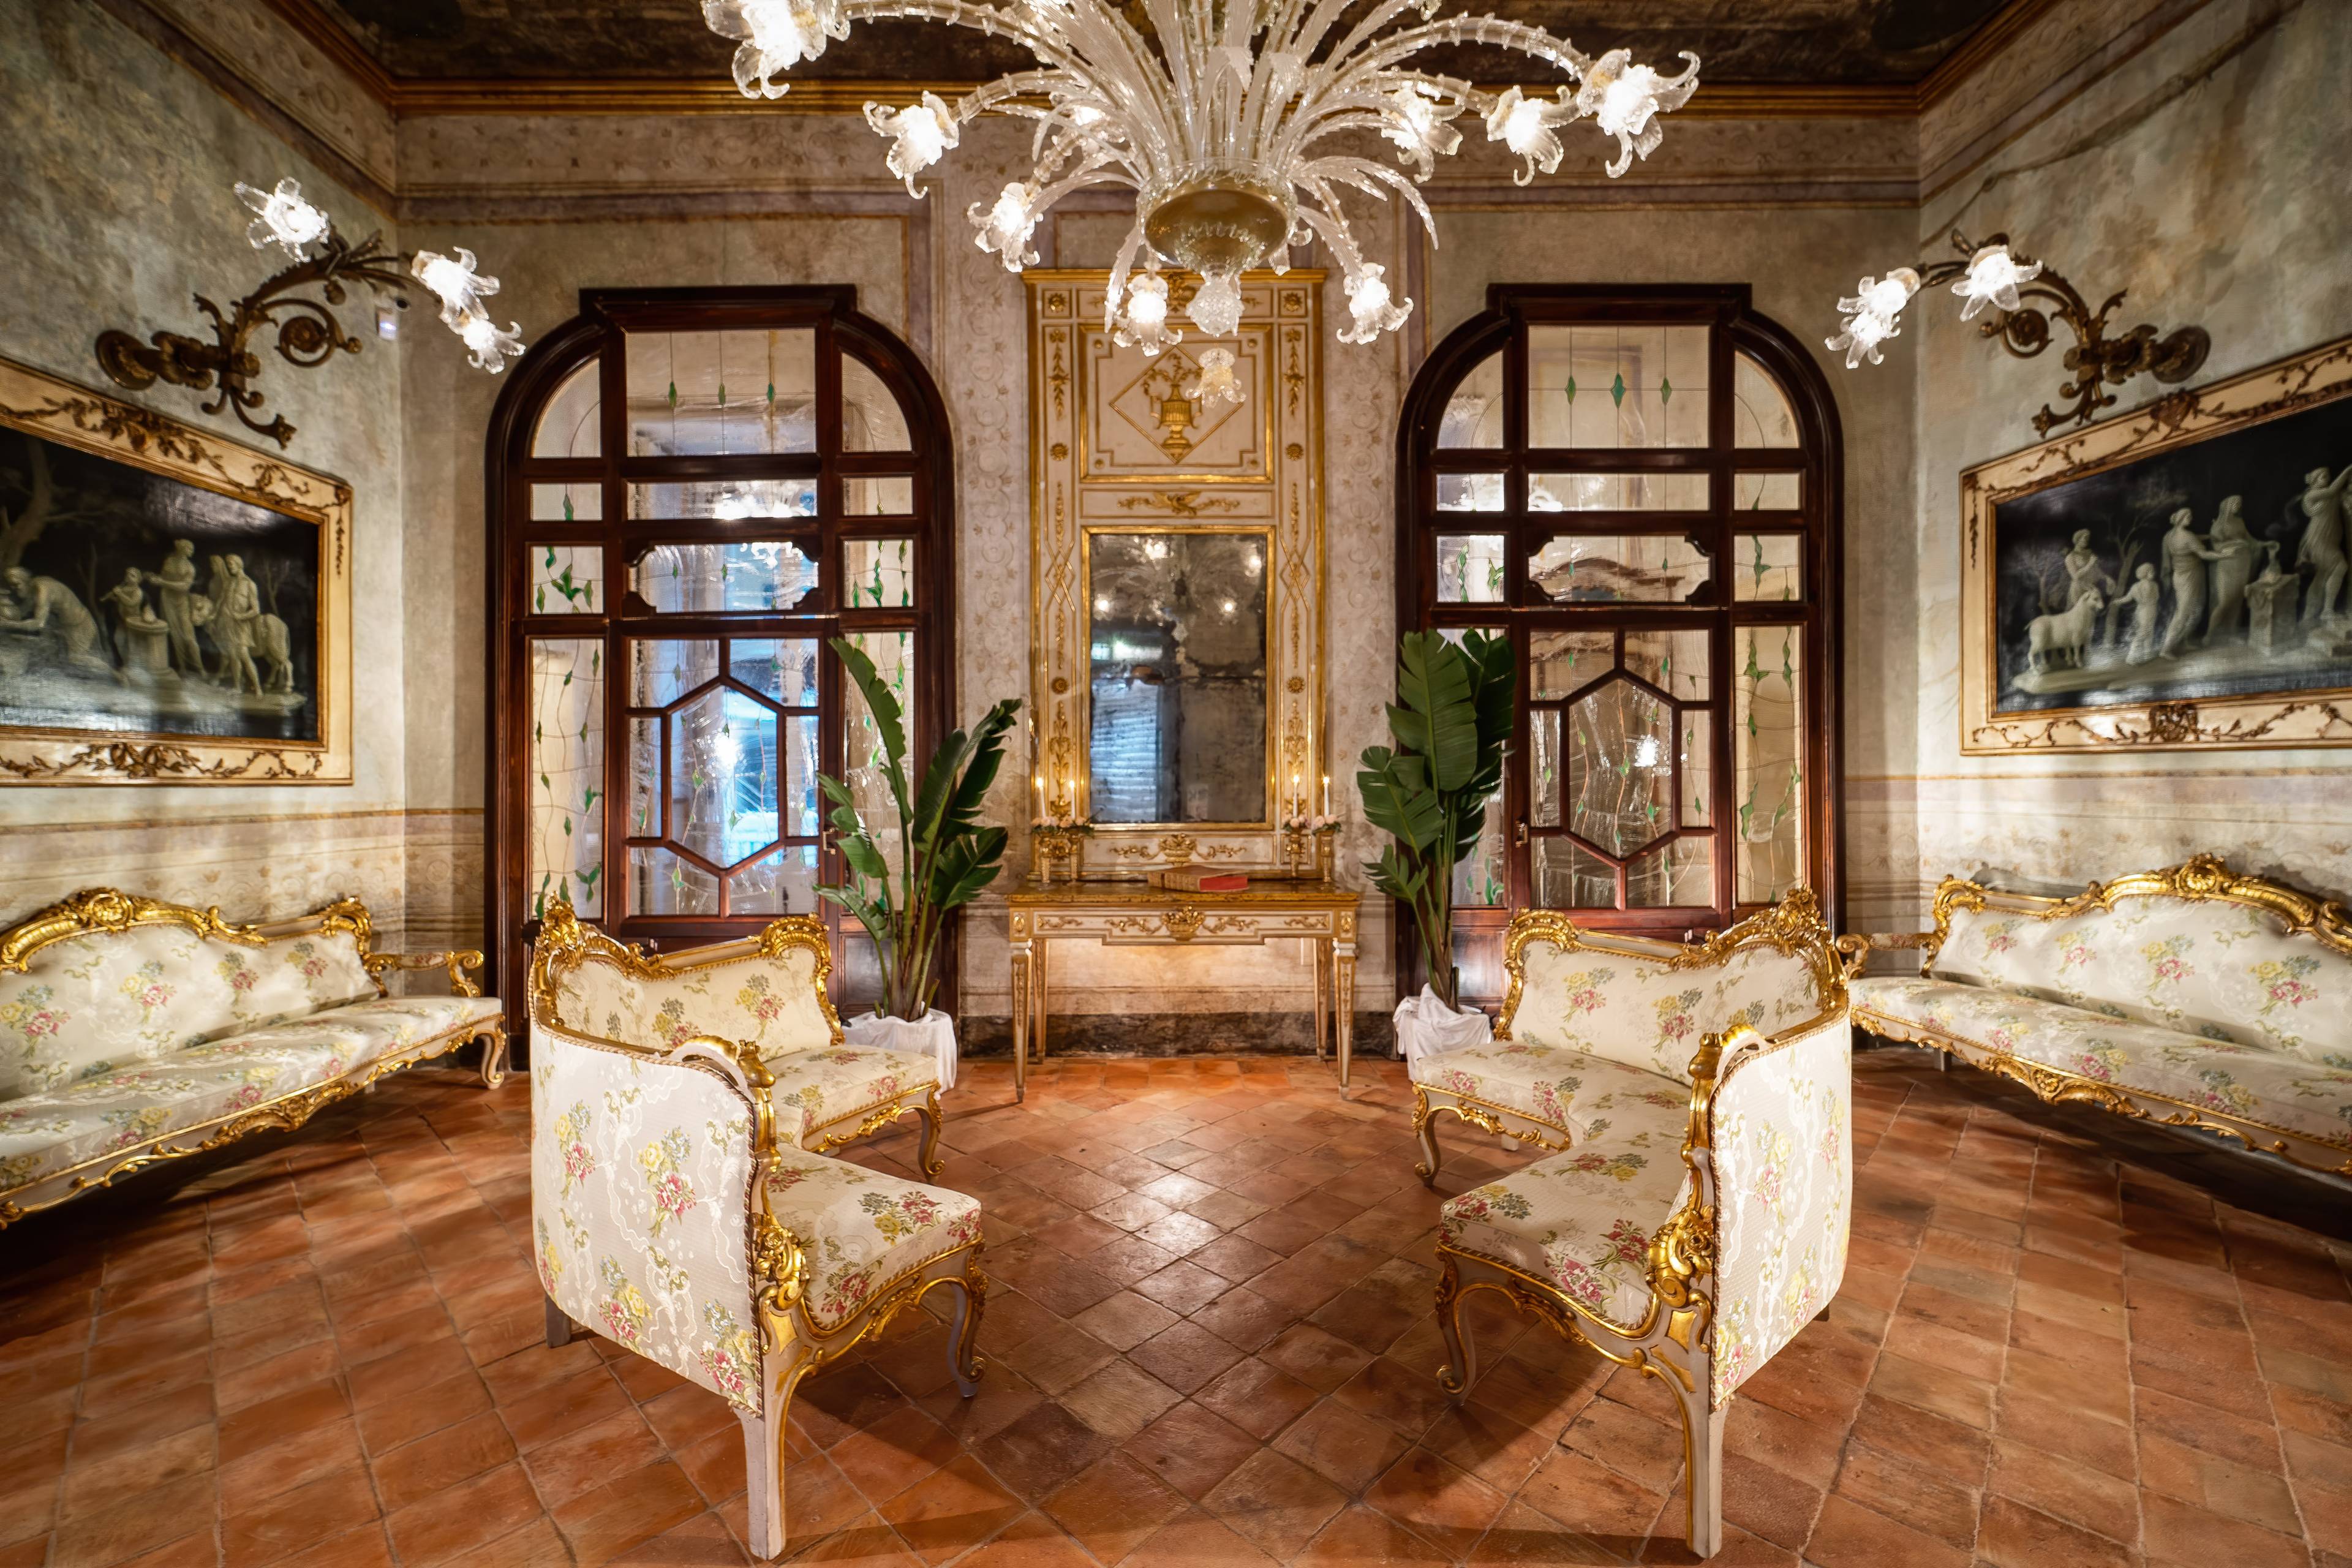 GORGEOUS HISTORIC PALACE IN NAPLES